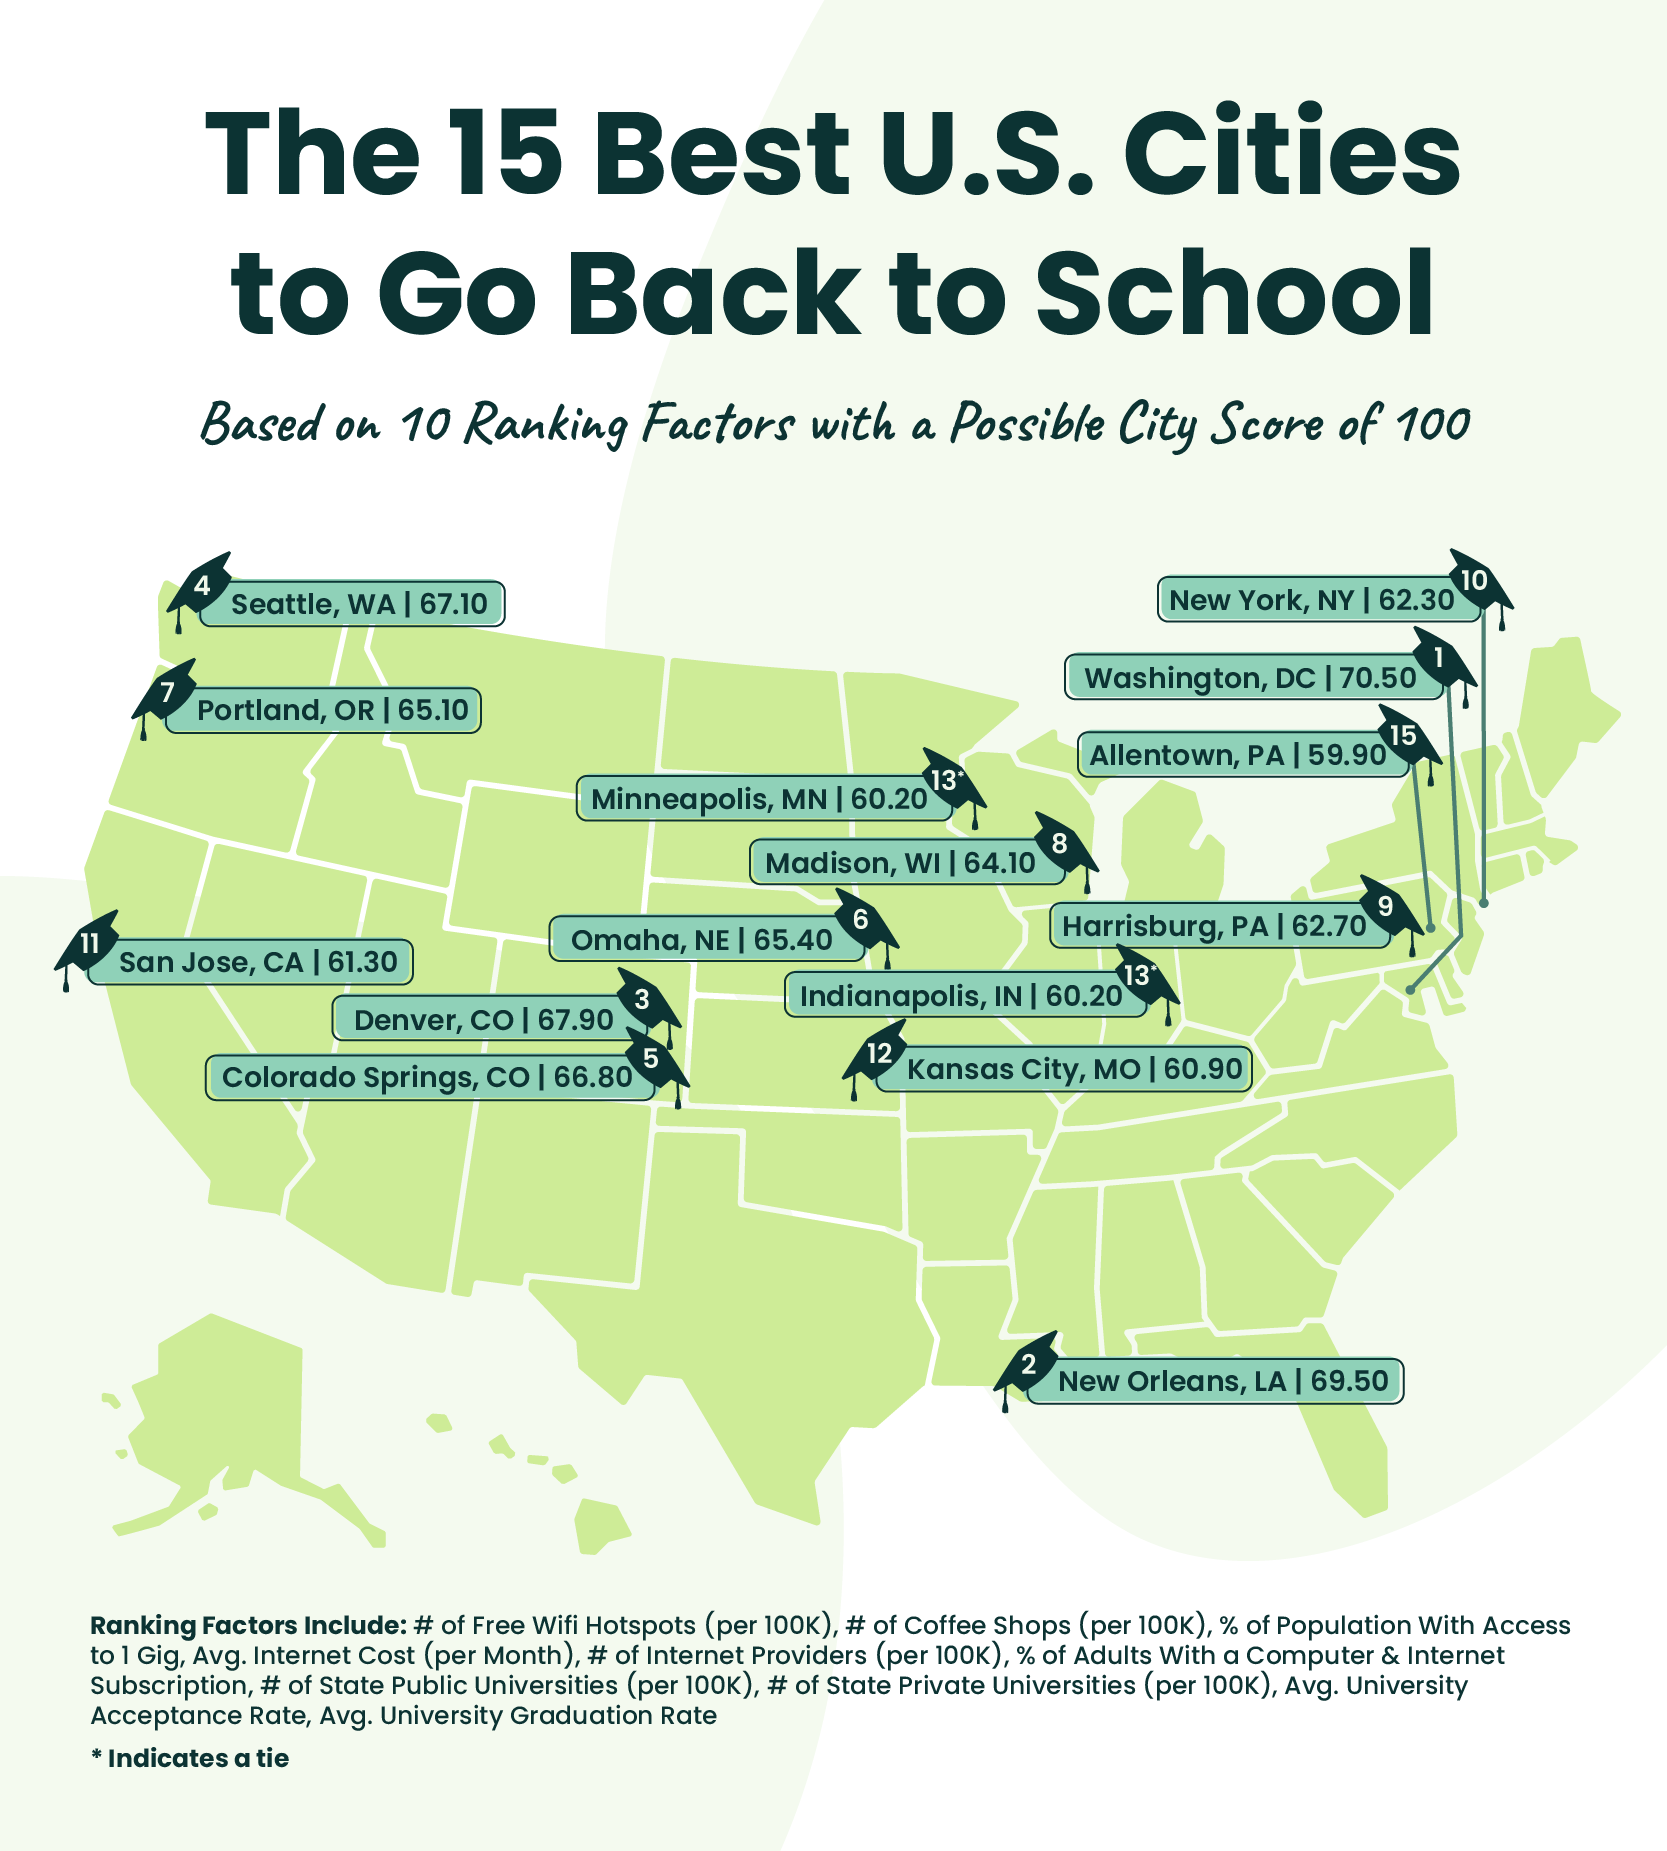 U.S. map showcasing the 15 best U.S. cities to go back to school